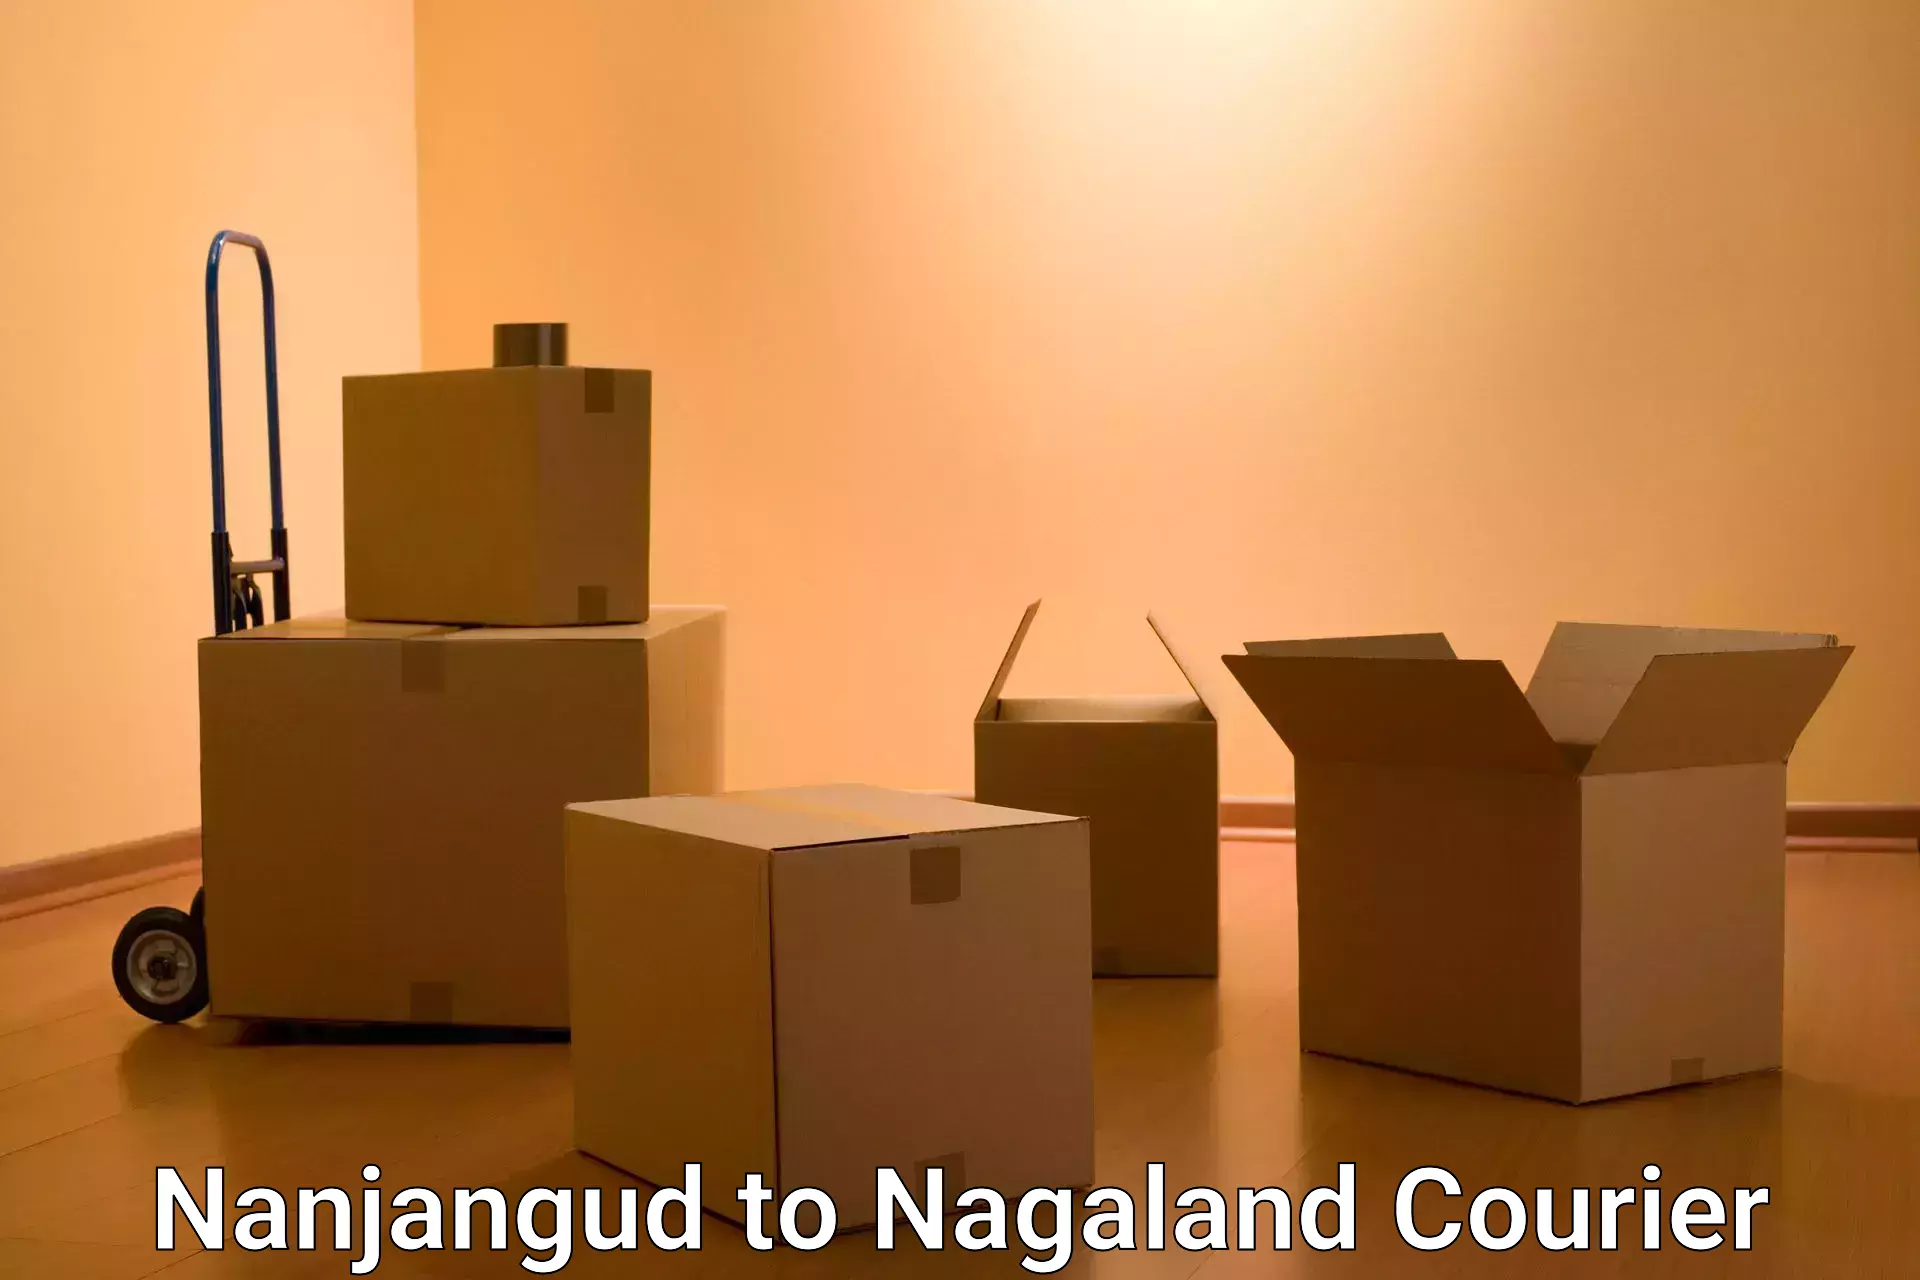 Courier service comparison in Nanjangud to Mokokchung